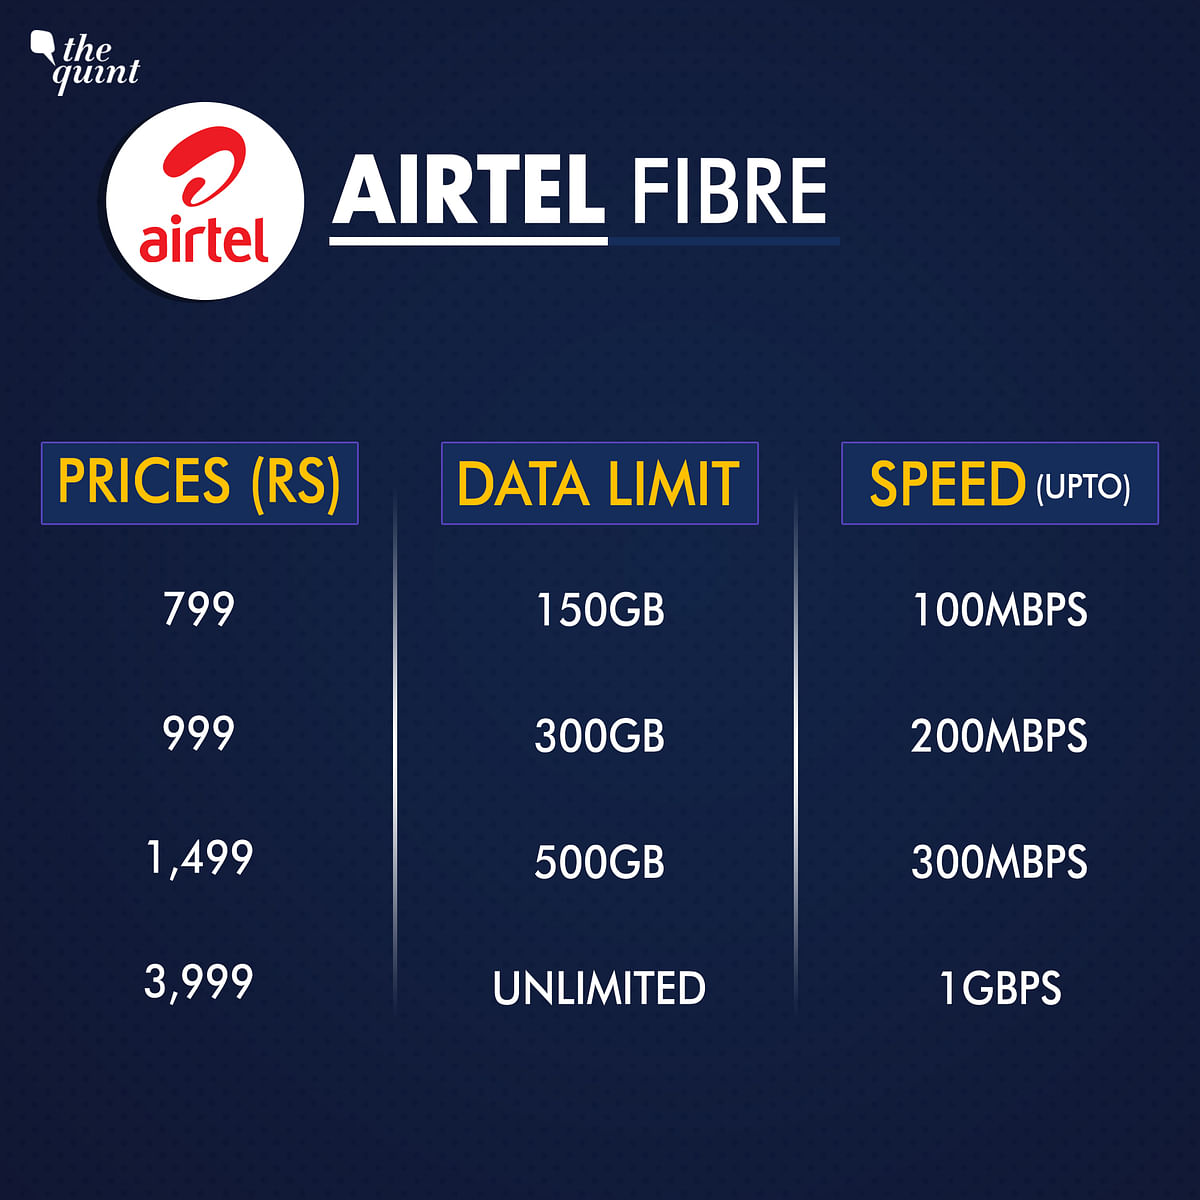 Airtel Xstream Fibre With 1Gbps Speed Launches to Compete With JioFiber